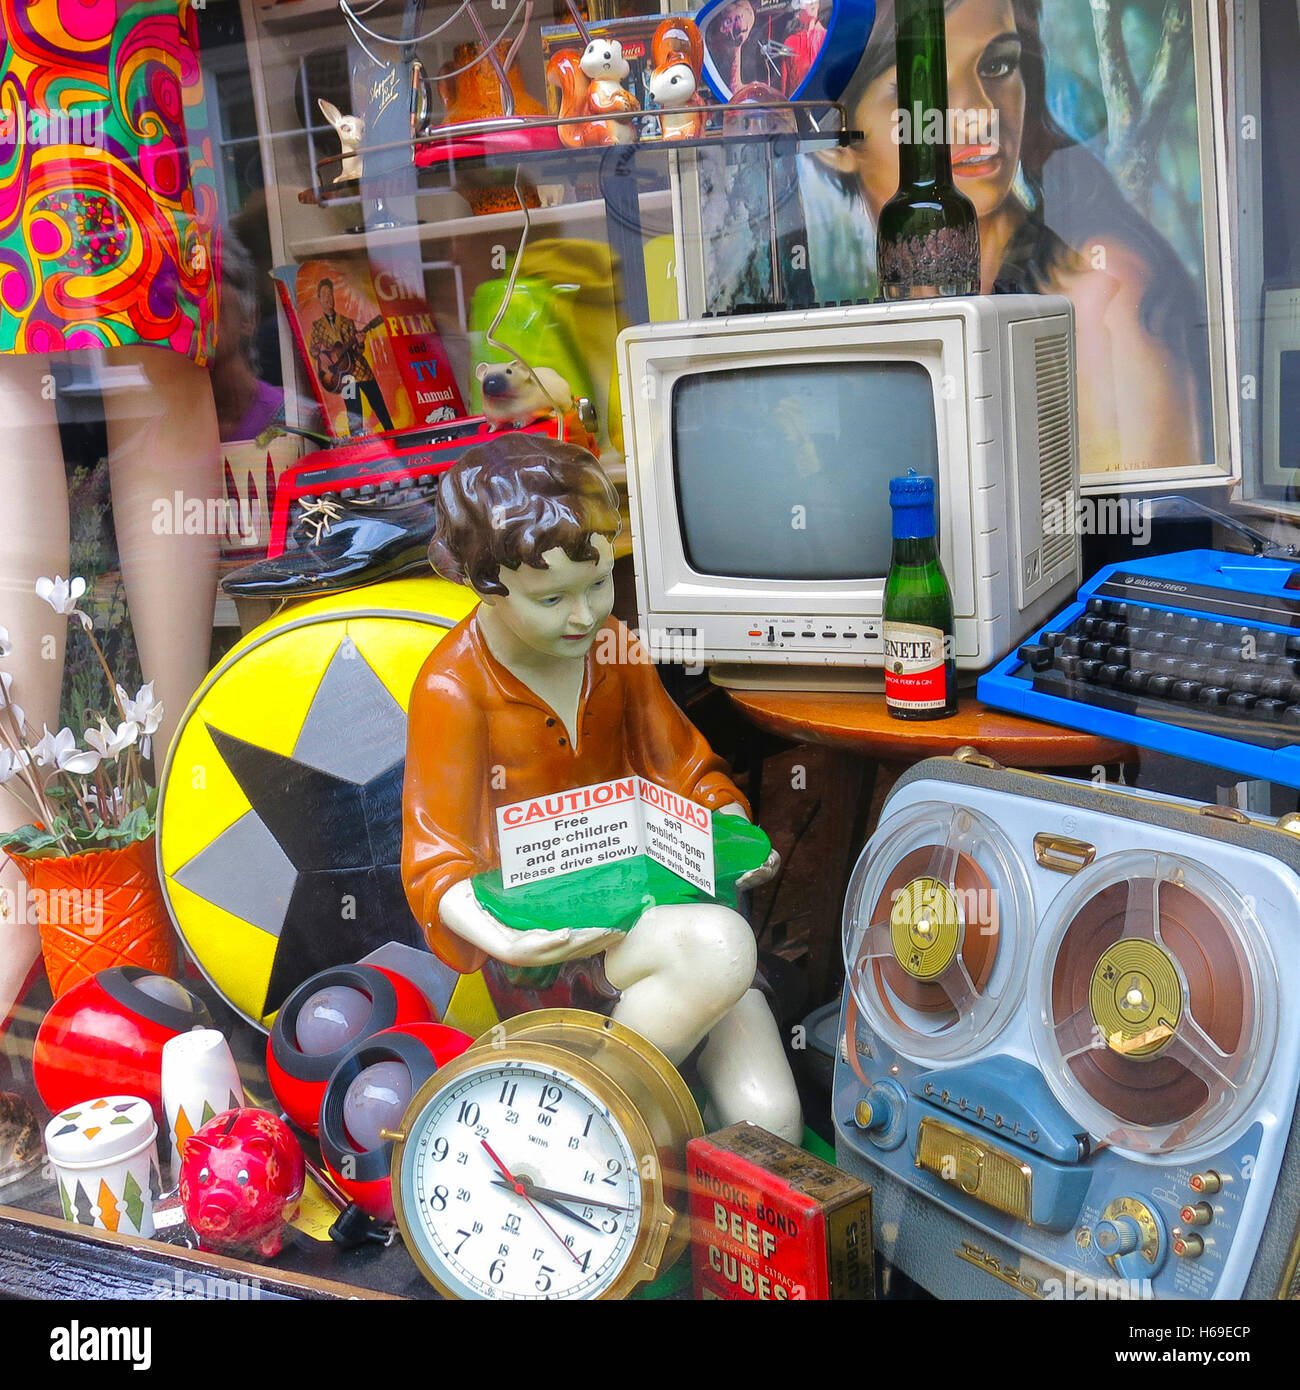 Colourful shop window display of vintage items Stock Photo